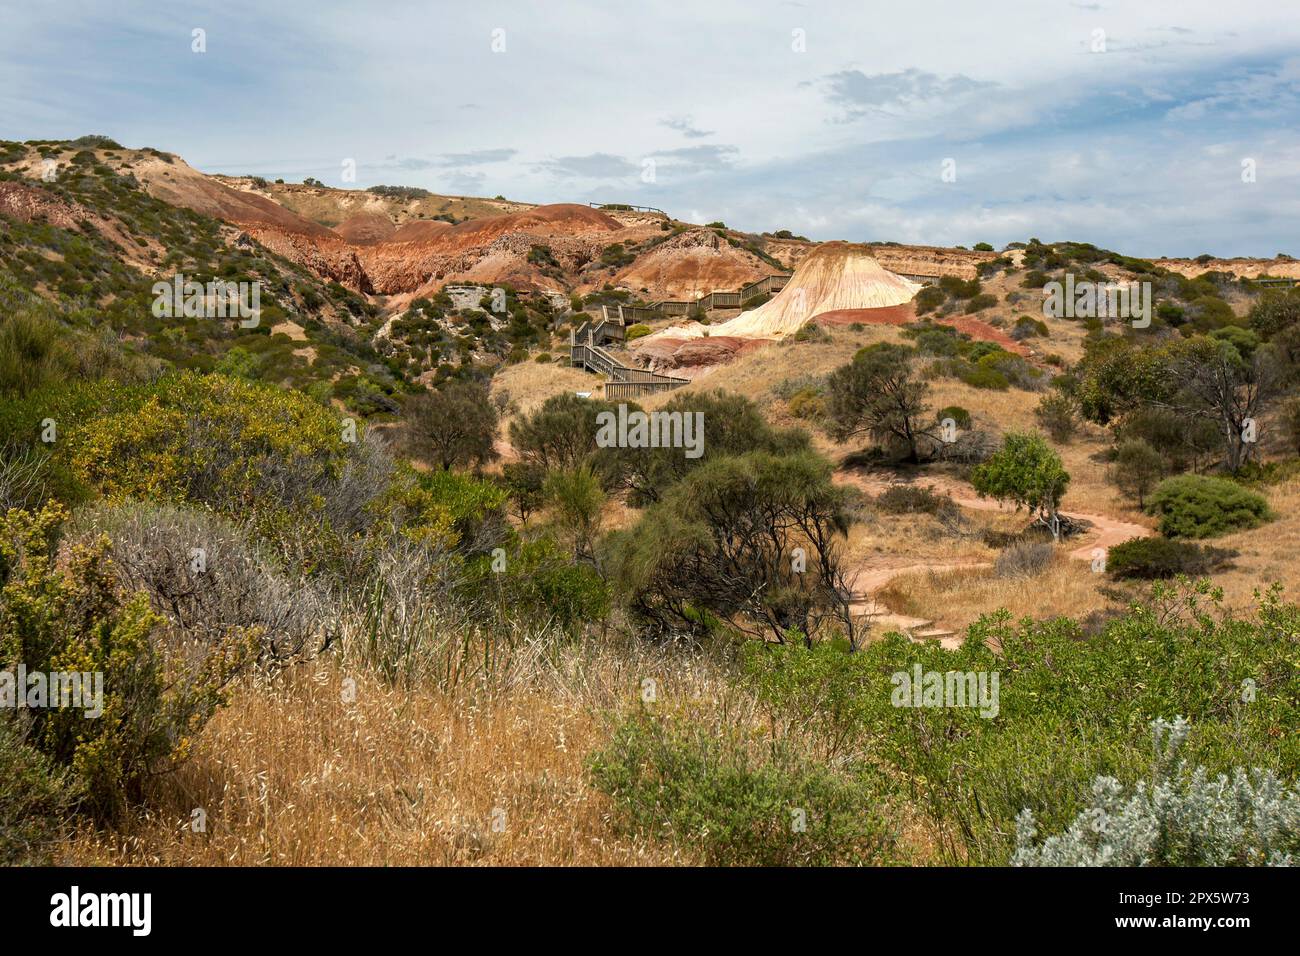 A view within the Hallett Cove Conservation Park in Adelaide in South Australia looking towards the famous Sugarloaf and Amphitheatre. Stock Photo